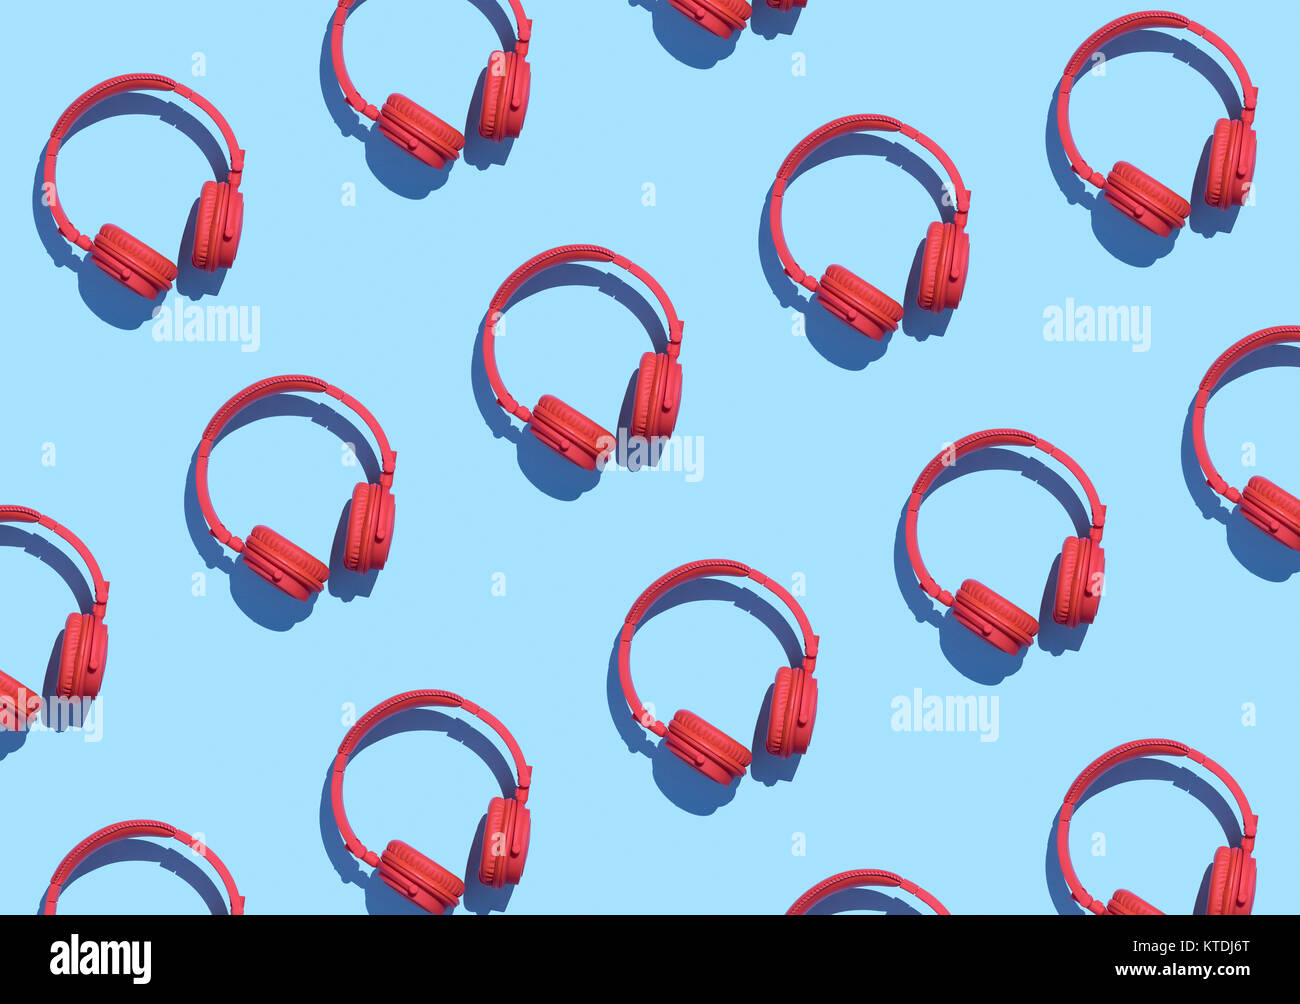 Collection of red wireless headphones on light blue background, 3D Rendering Stock Photo